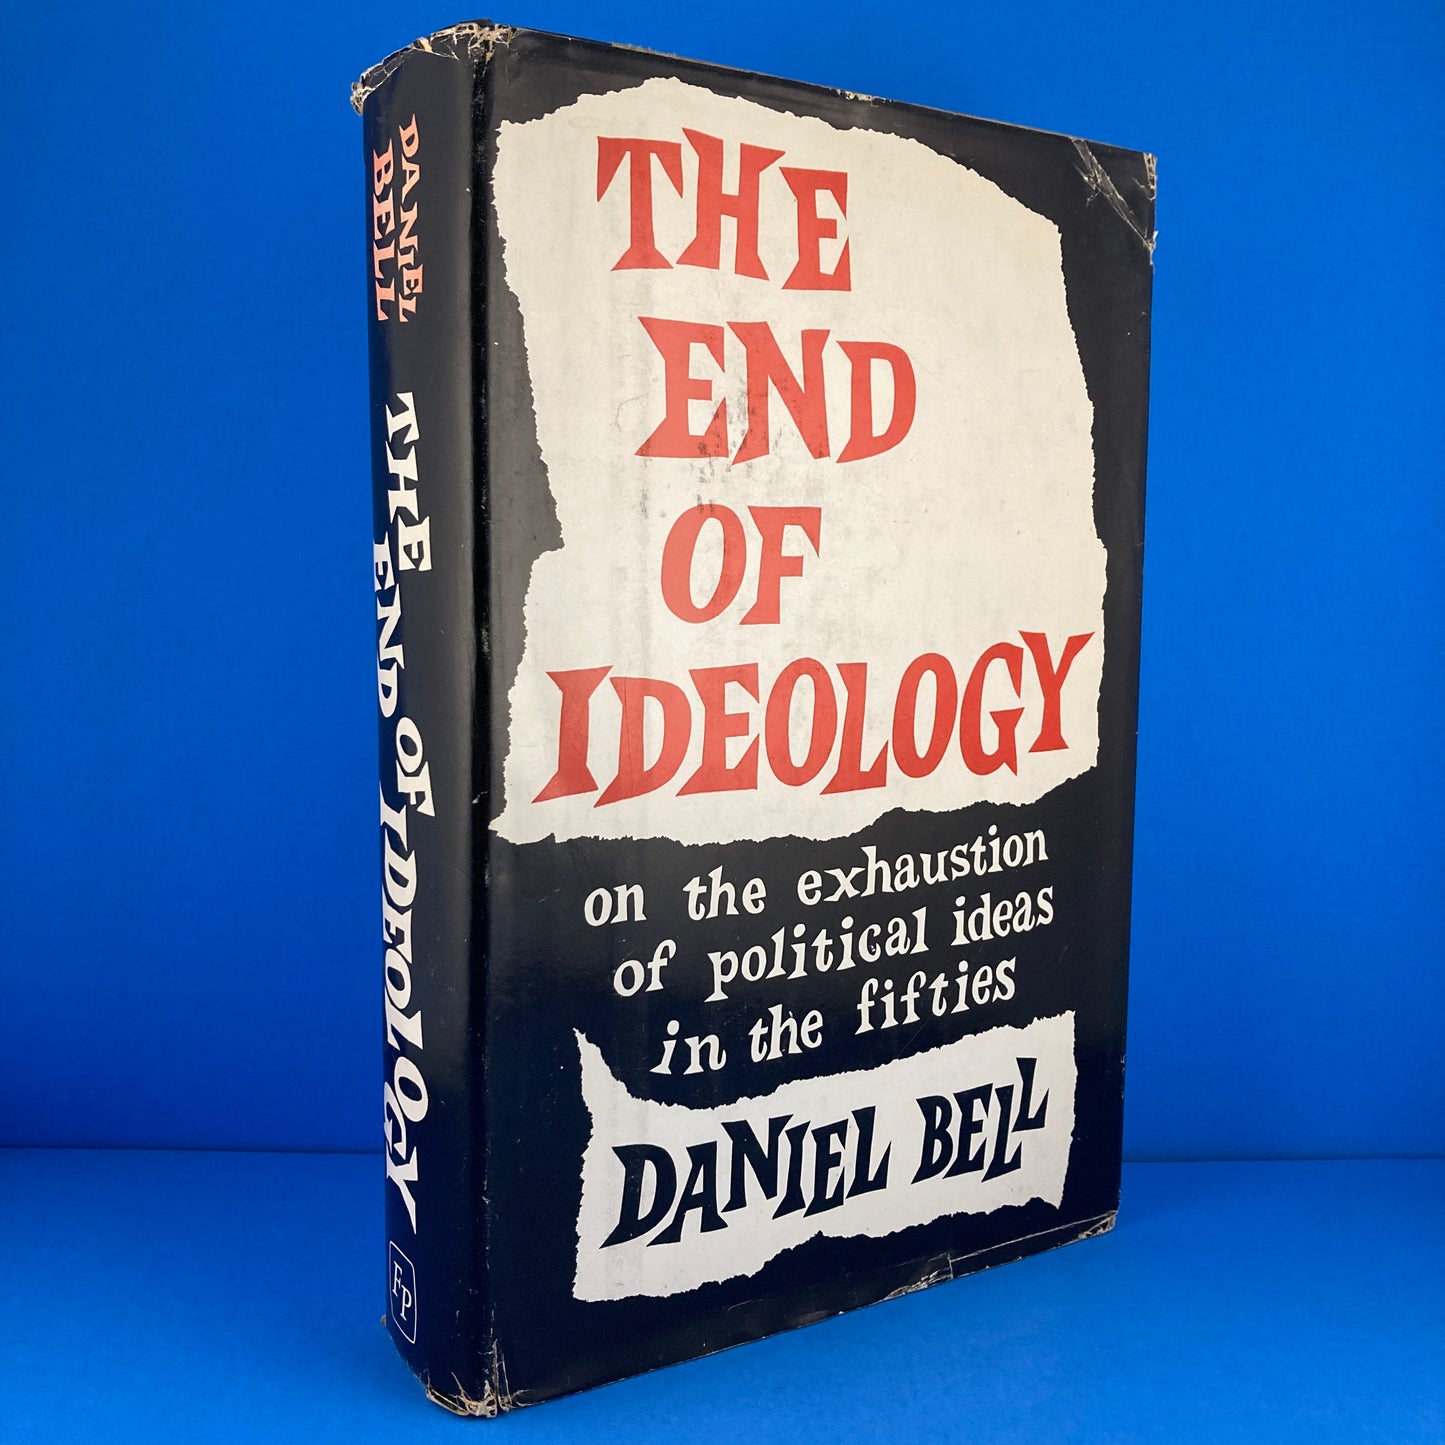 The End of Ideology